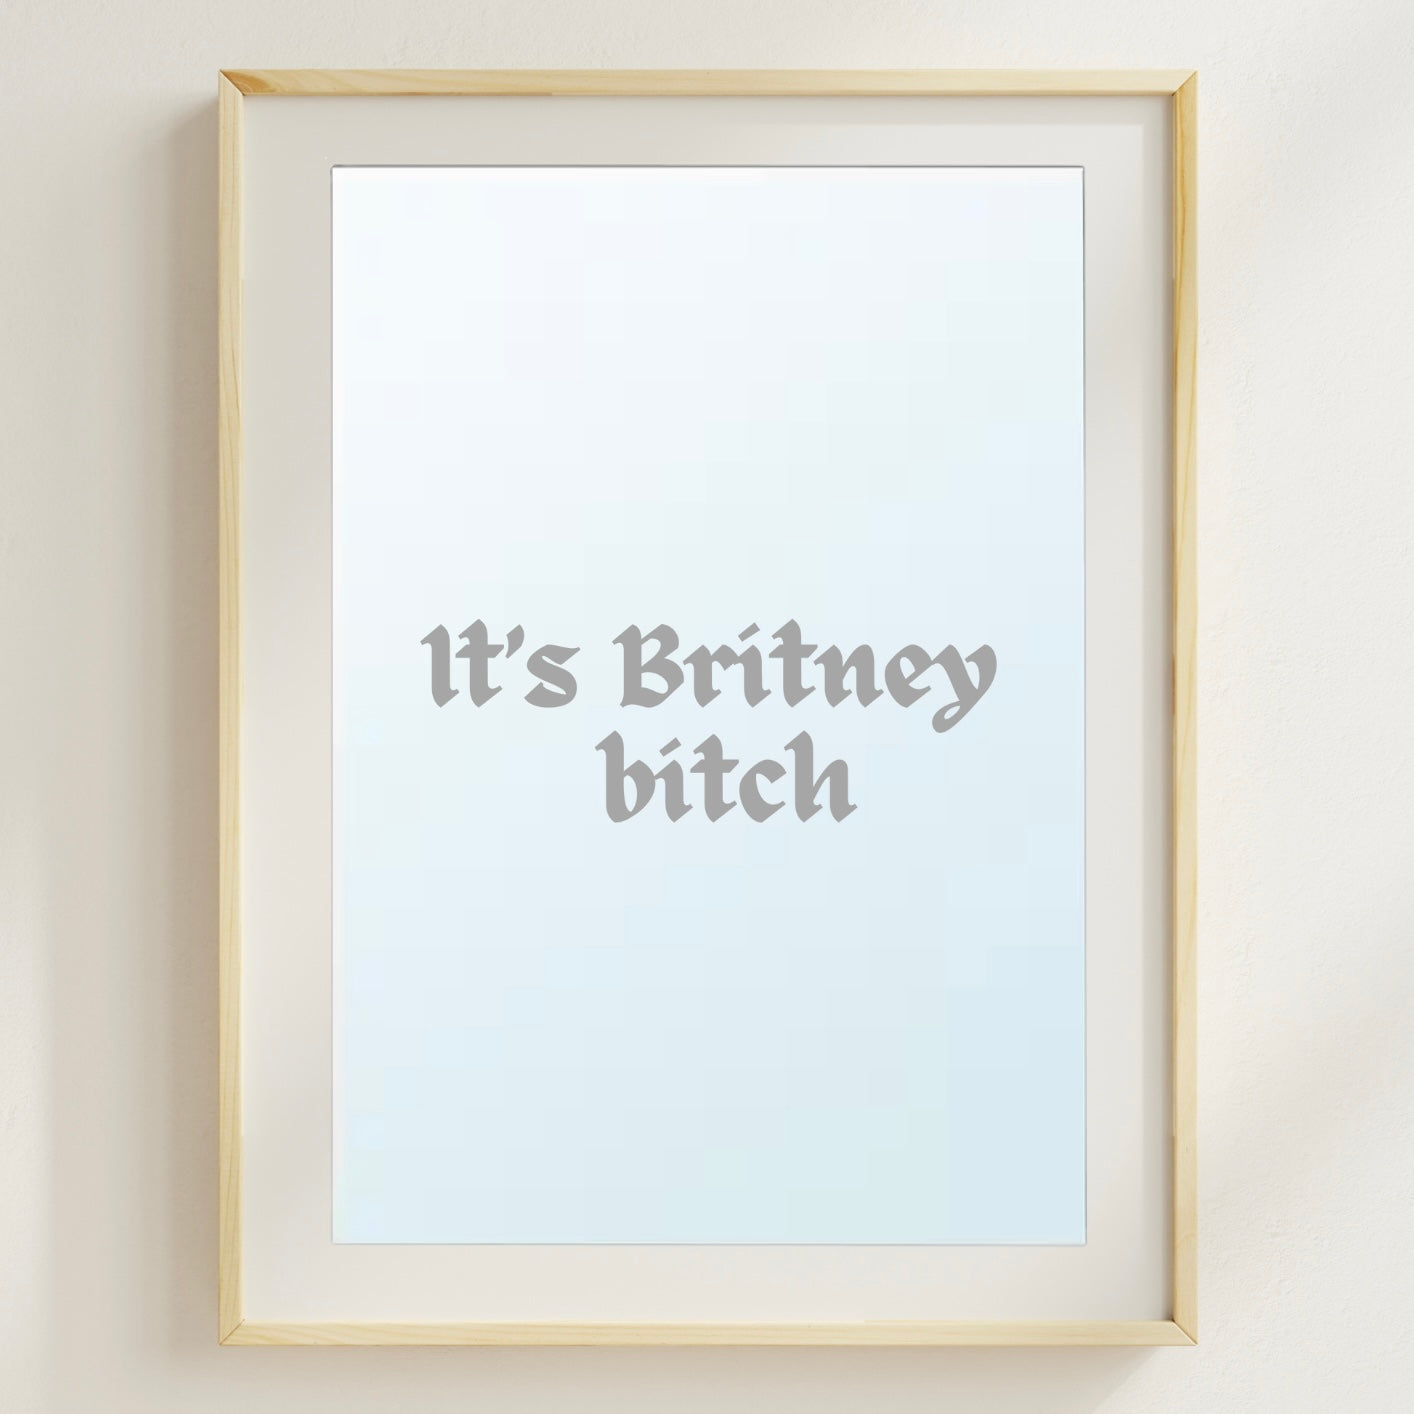 A stylish A4 mirror for all Britney fans, featuring the phrase 'It's Britney, Bitch' in bold lettering.